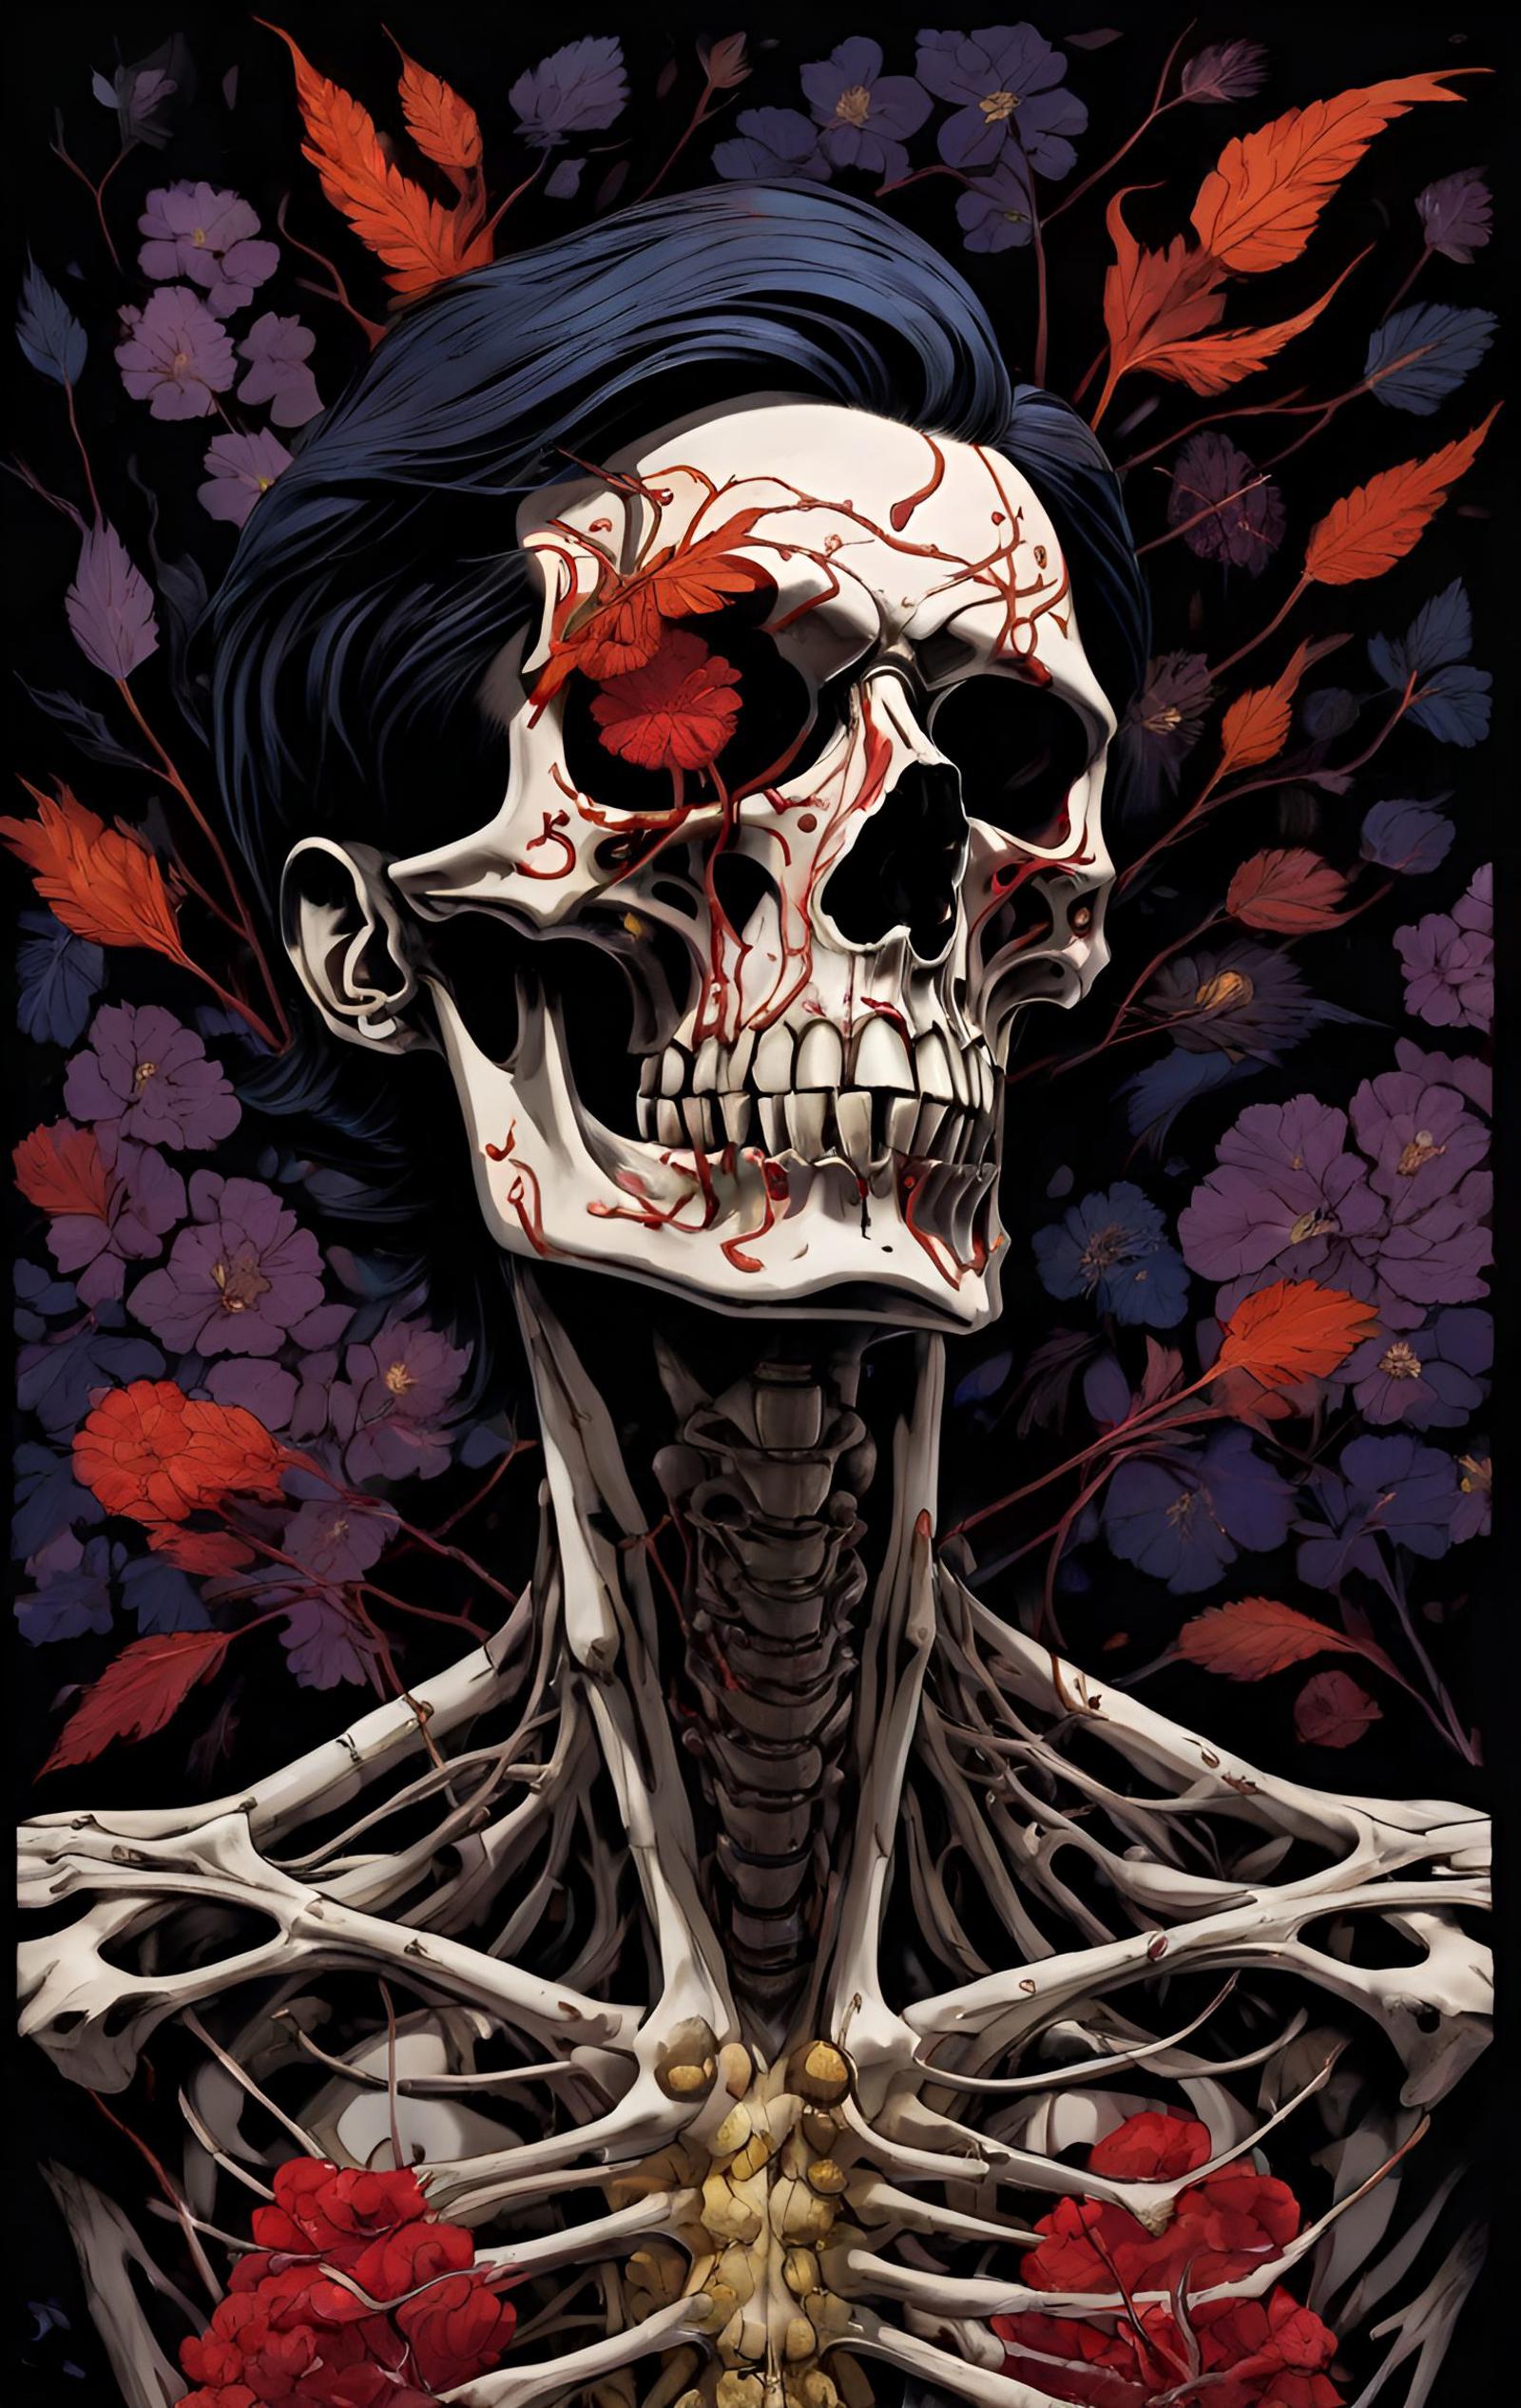 A skeleton with a flower in its skull and surrounded by leaves.